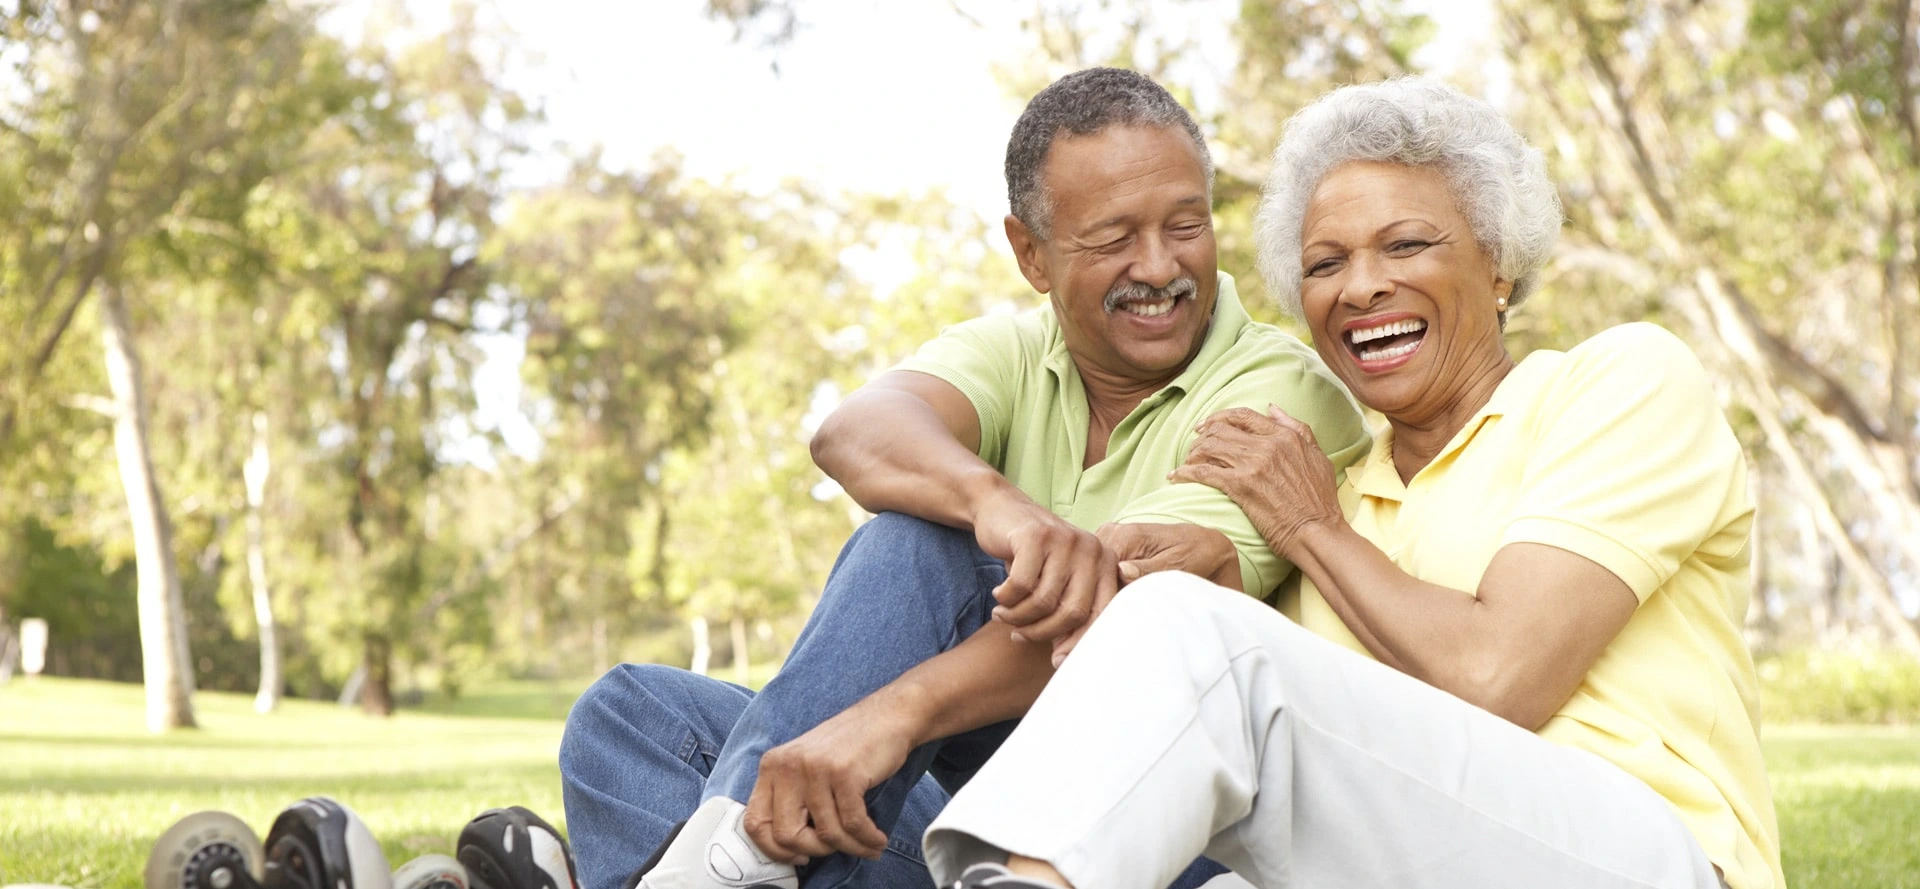 A happy elderly couple sits on the grass, smiling and embracing, portraying a life free from the discomfort of dental issues.